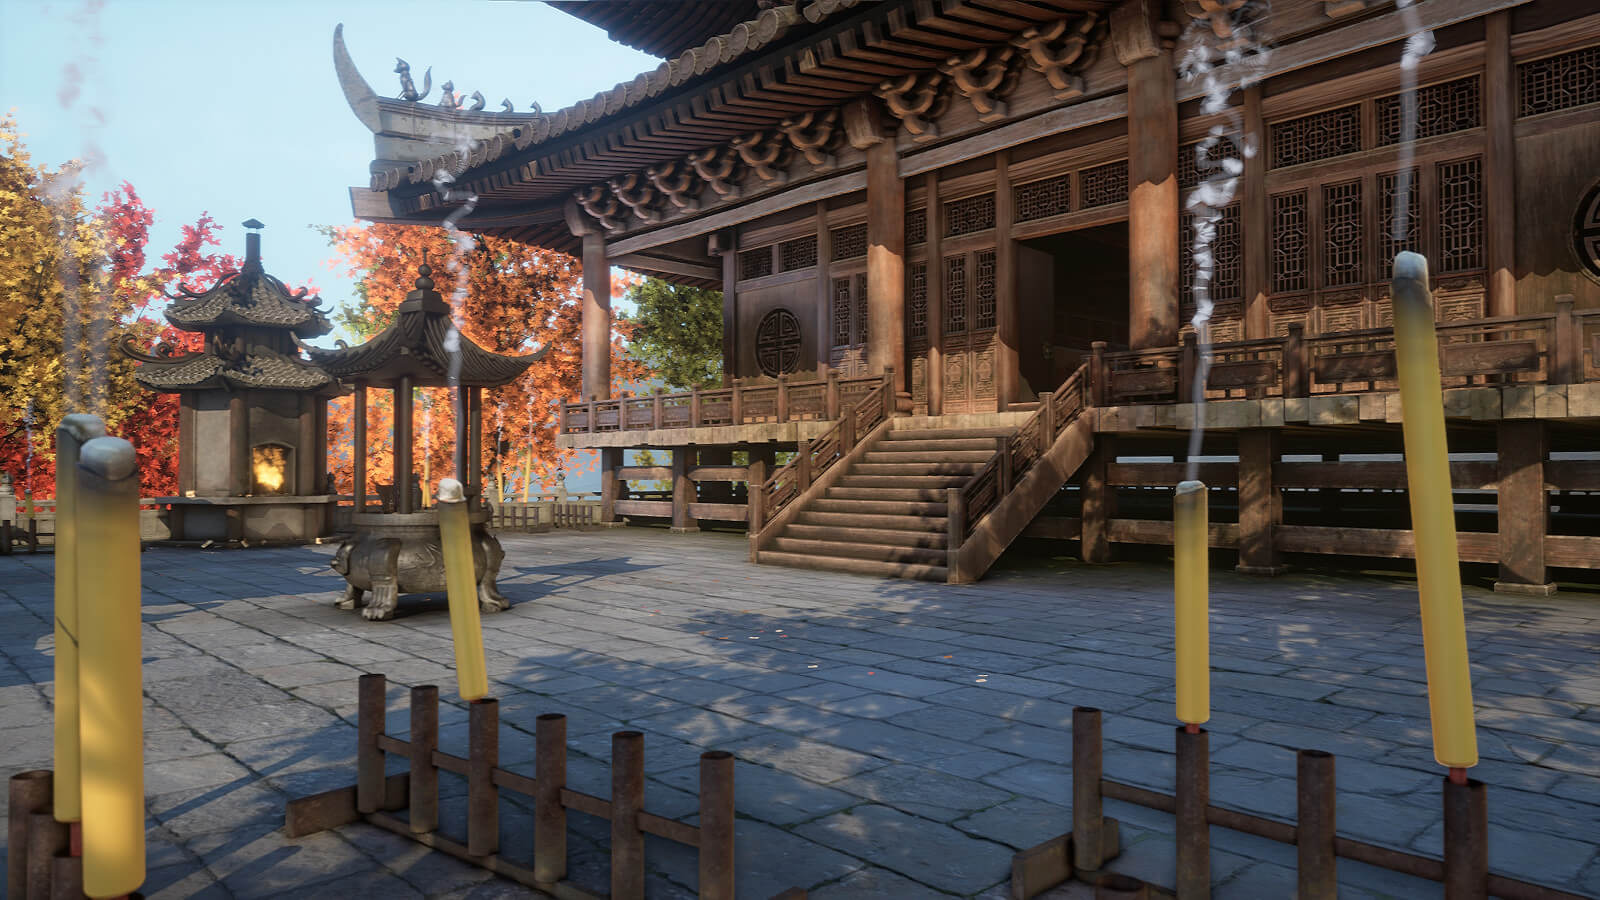 Exterior of a temple courtyard in Autumn